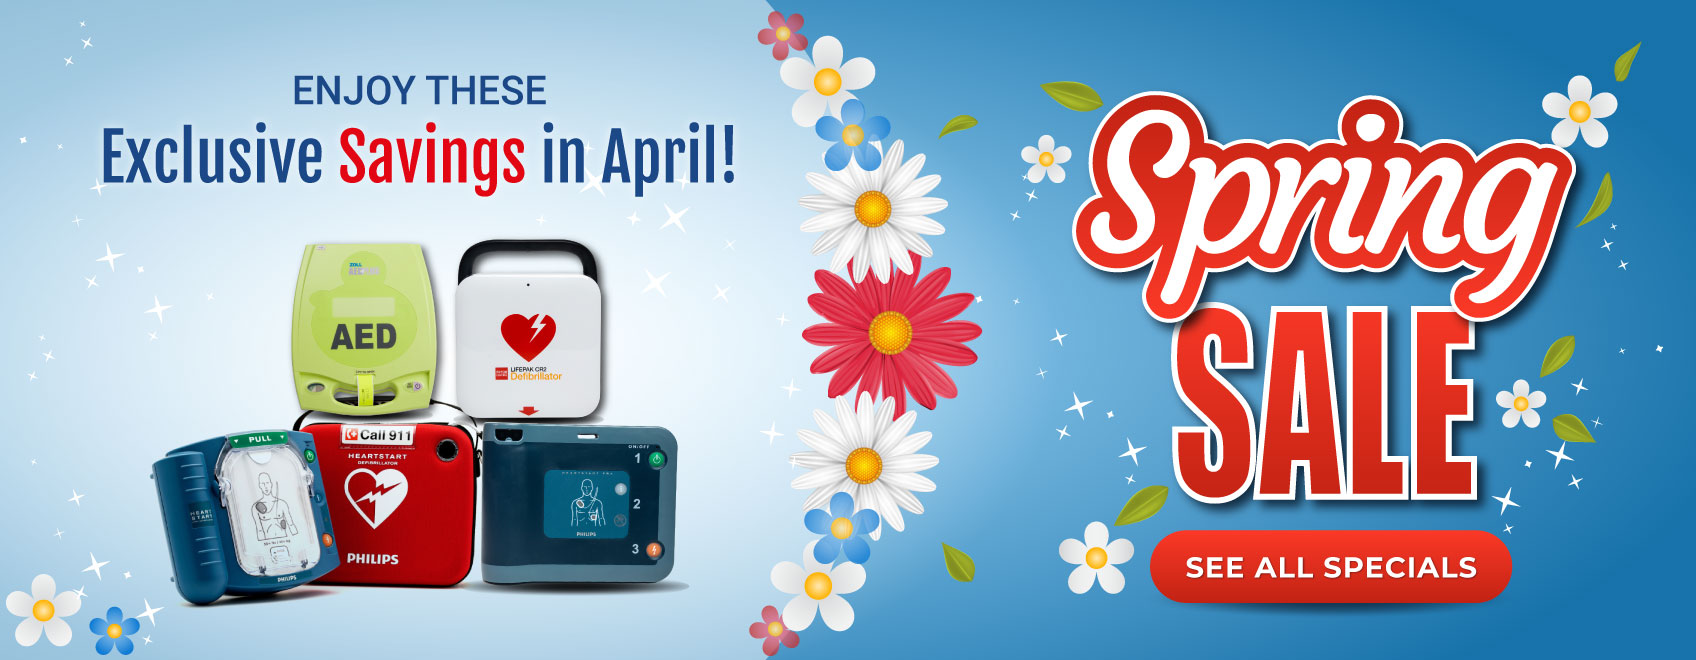 Buy an AED Device - AED Defibrillators April 2024 Spring Sale